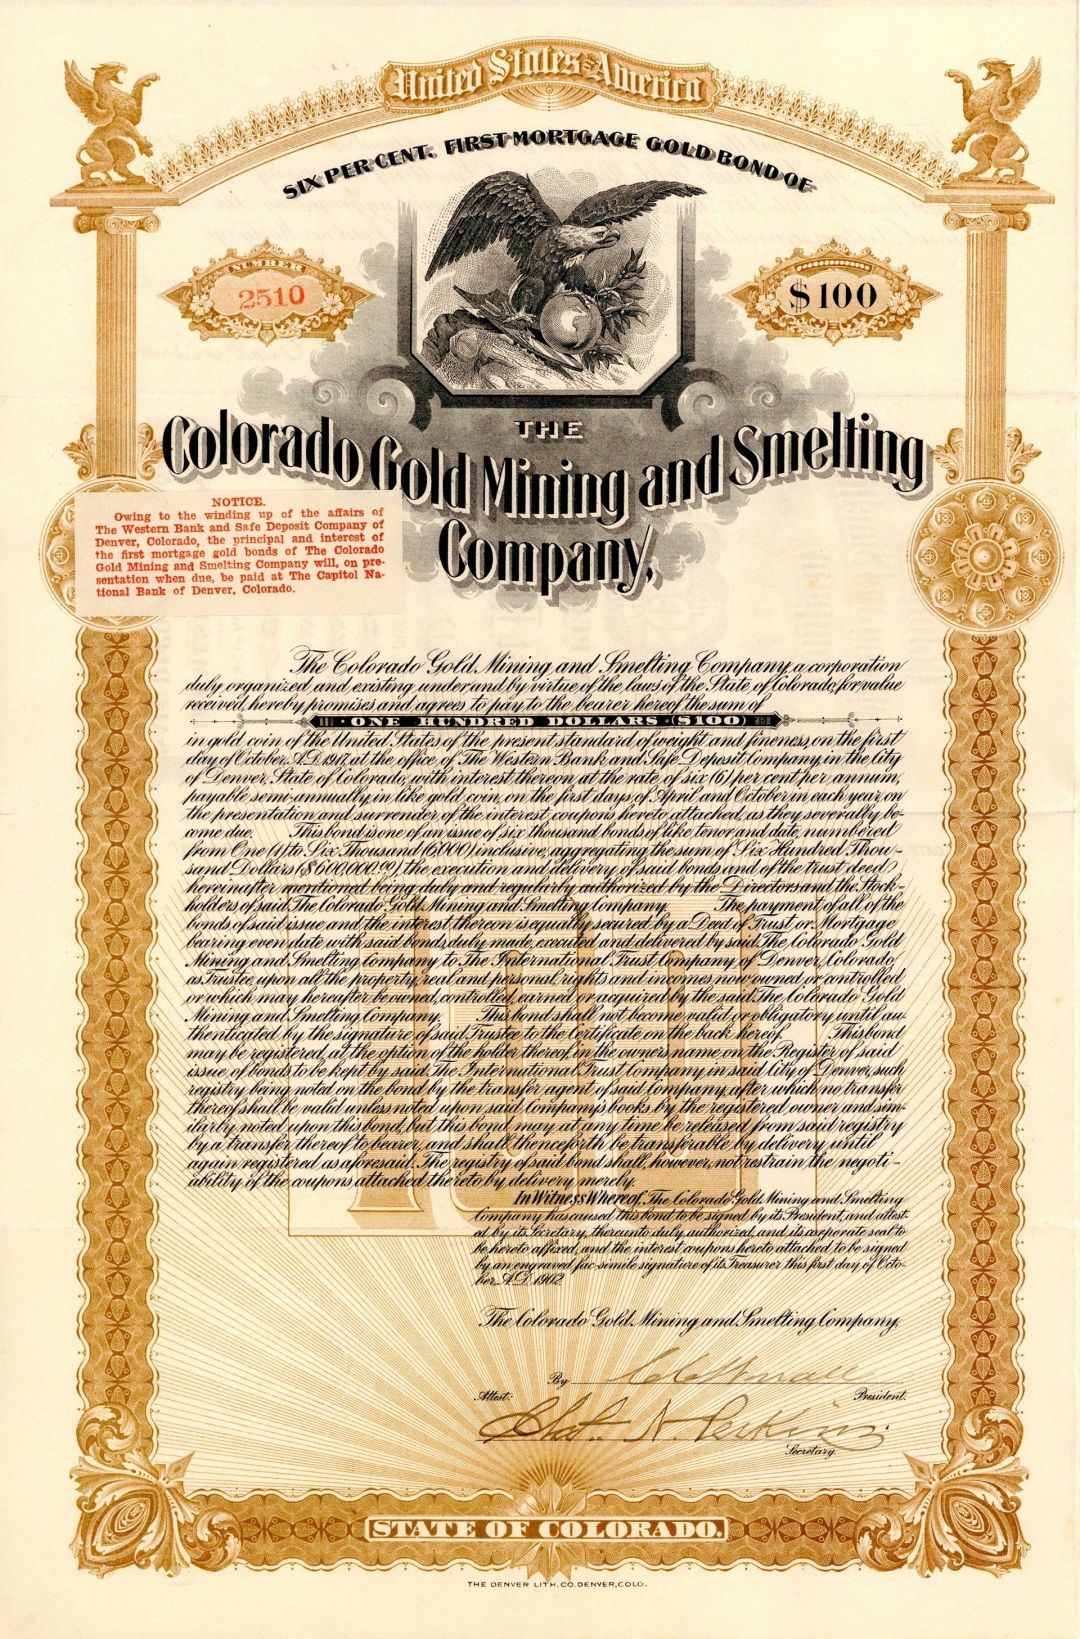 Colorado Gold Mining and Smelting Co. - 1902 dated $100 Colorado Mining Bond